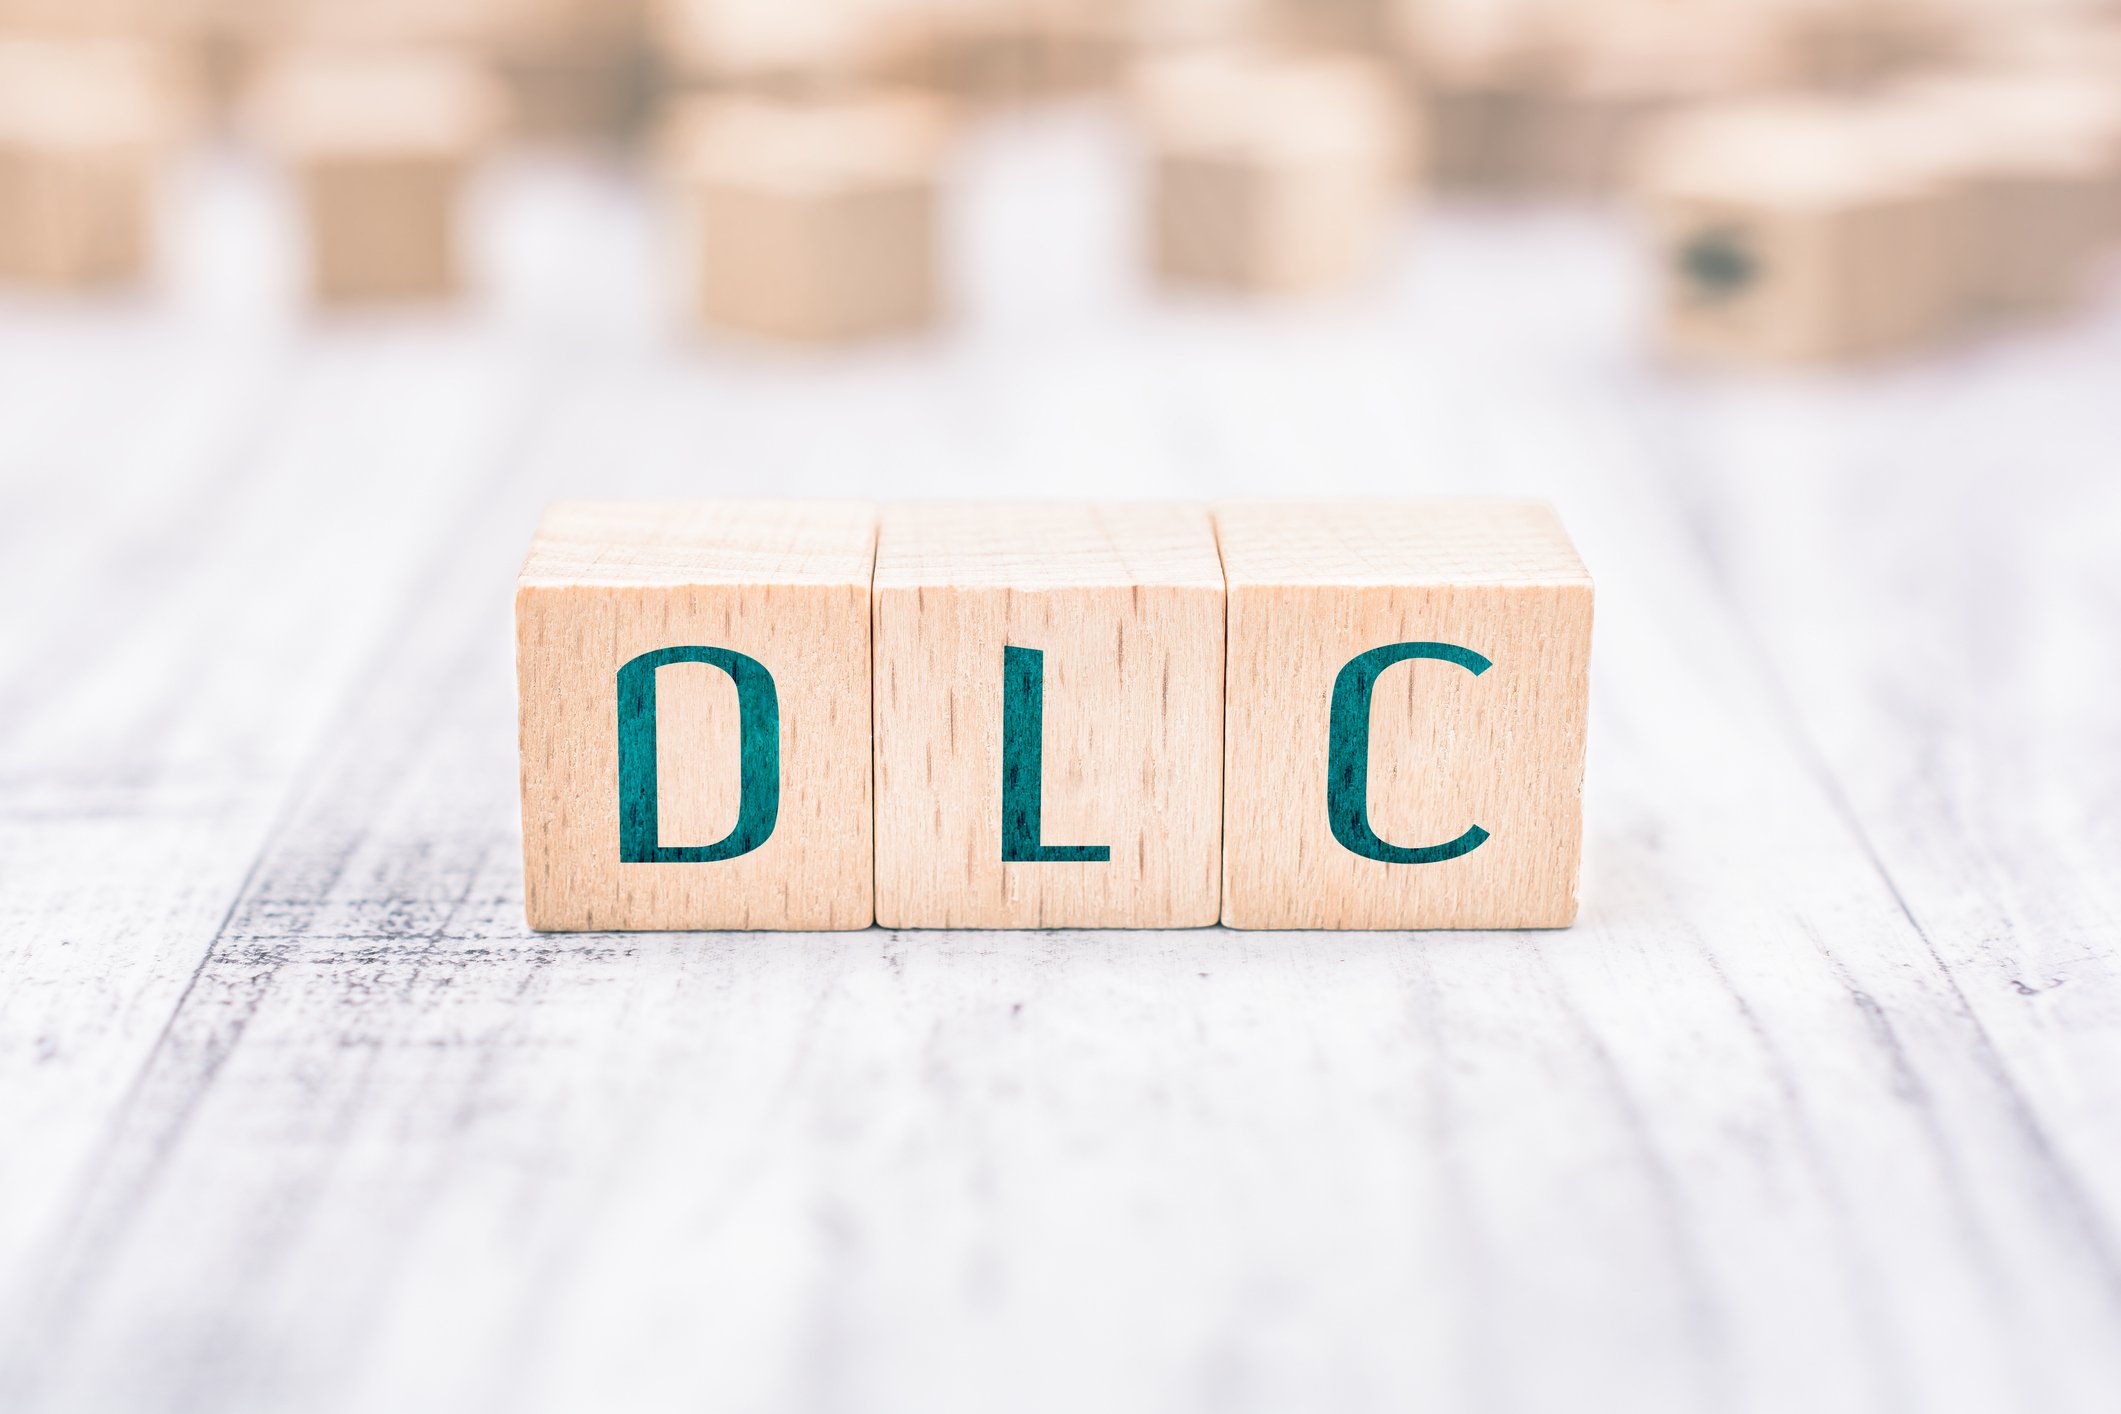 The Word DLC Formed By Wooden Blocks On A White Table